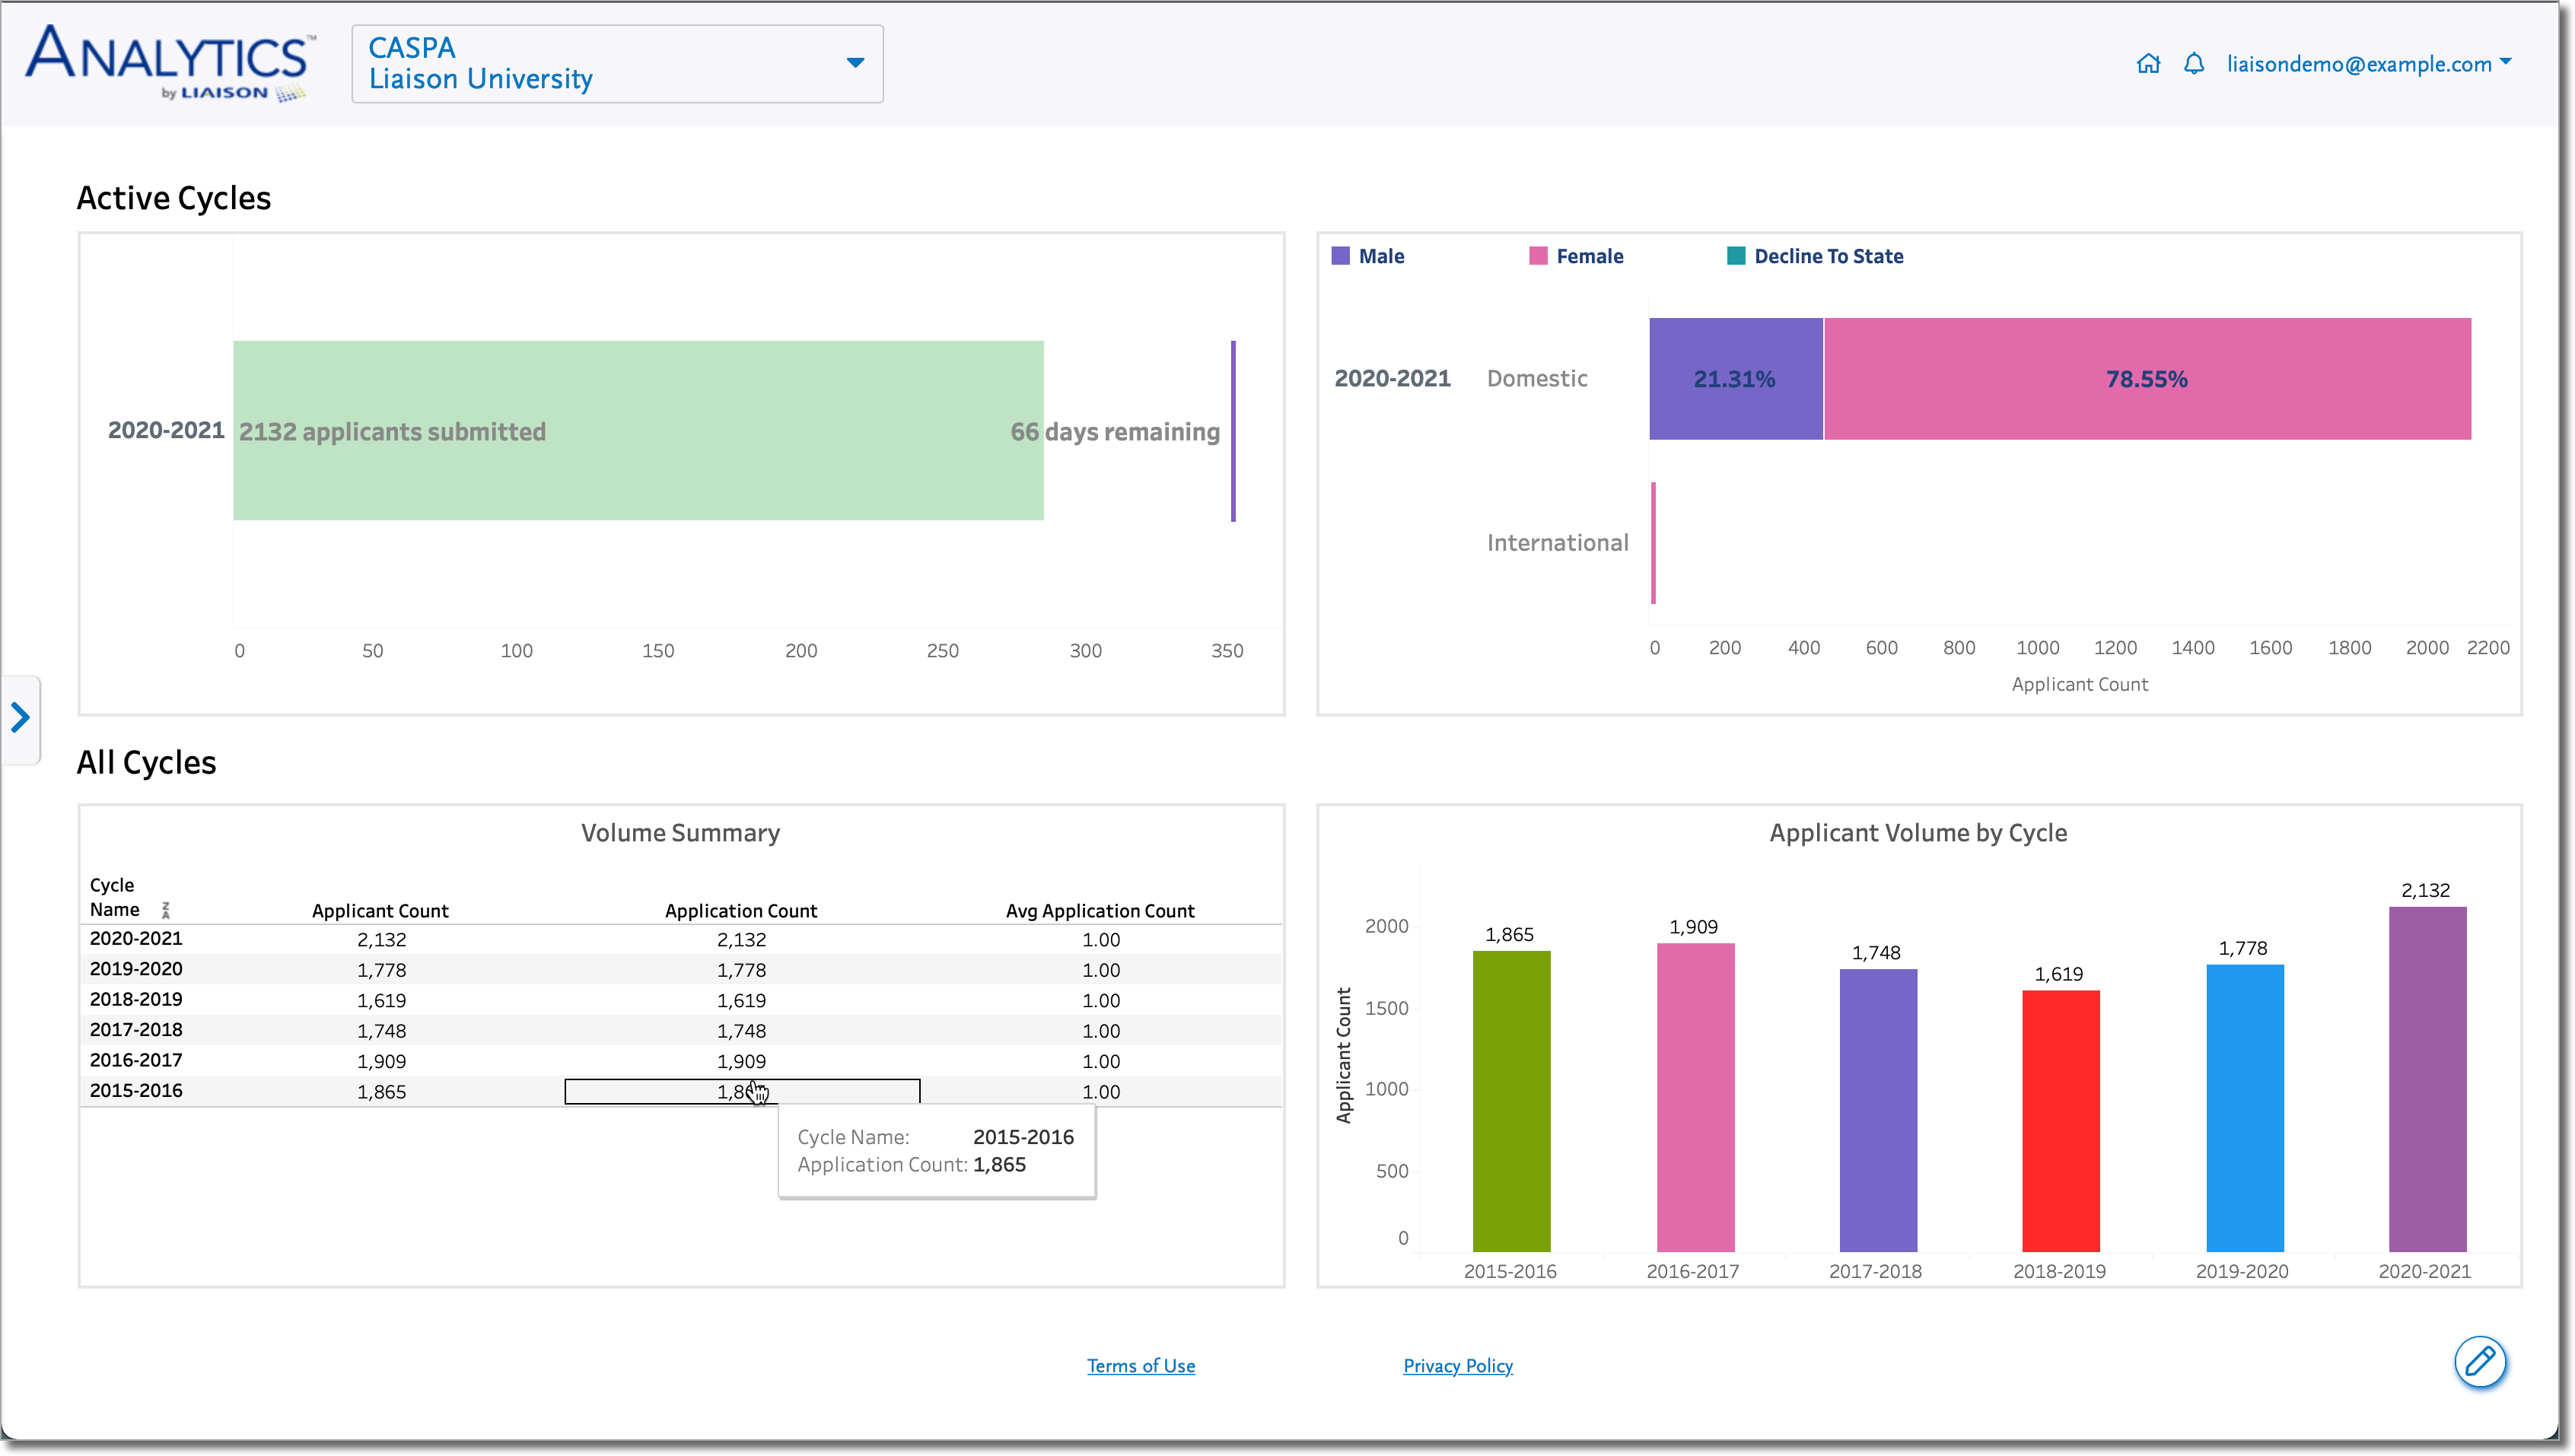 The Analytics by Liaison dashboard